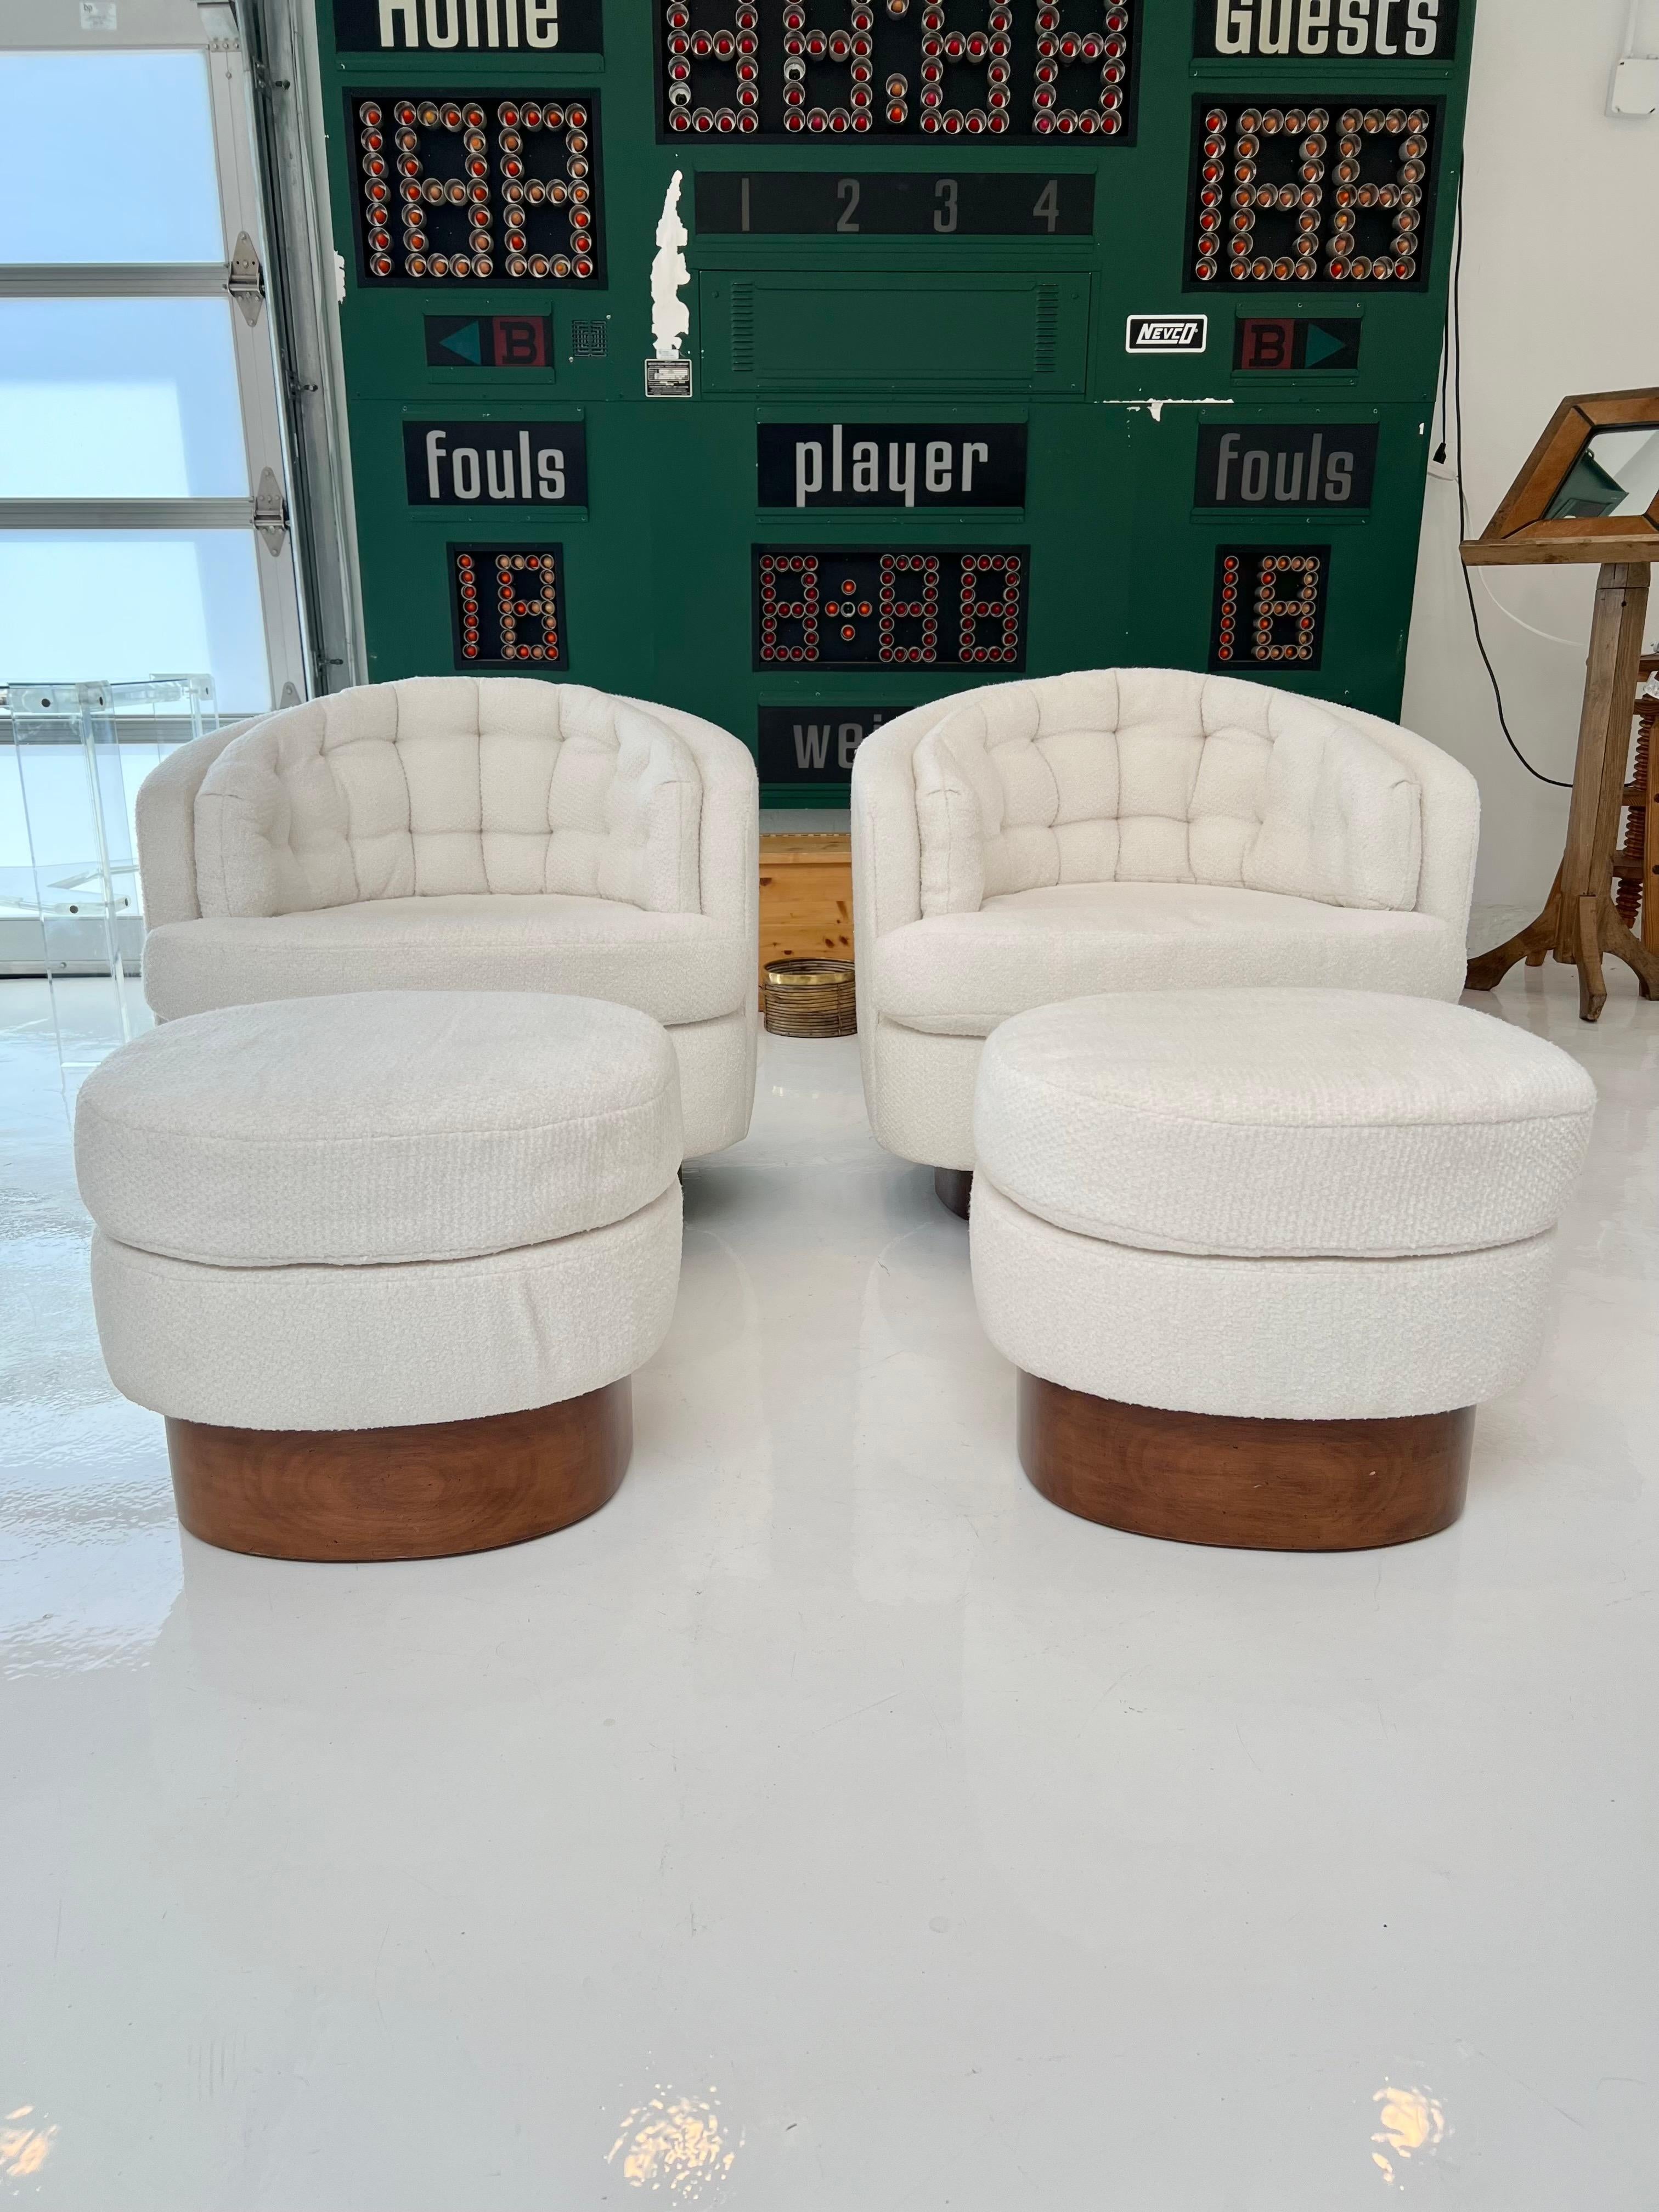 Stunning pair of Milo Baughman club chairs with matching ottomans. Wood plinth bases to all 4 pieces. Tufted back cushion on chairs adds a ton of comfort and style. Chairs rock back and forth and swivel. Great condition to boucle fabric. Sold as a